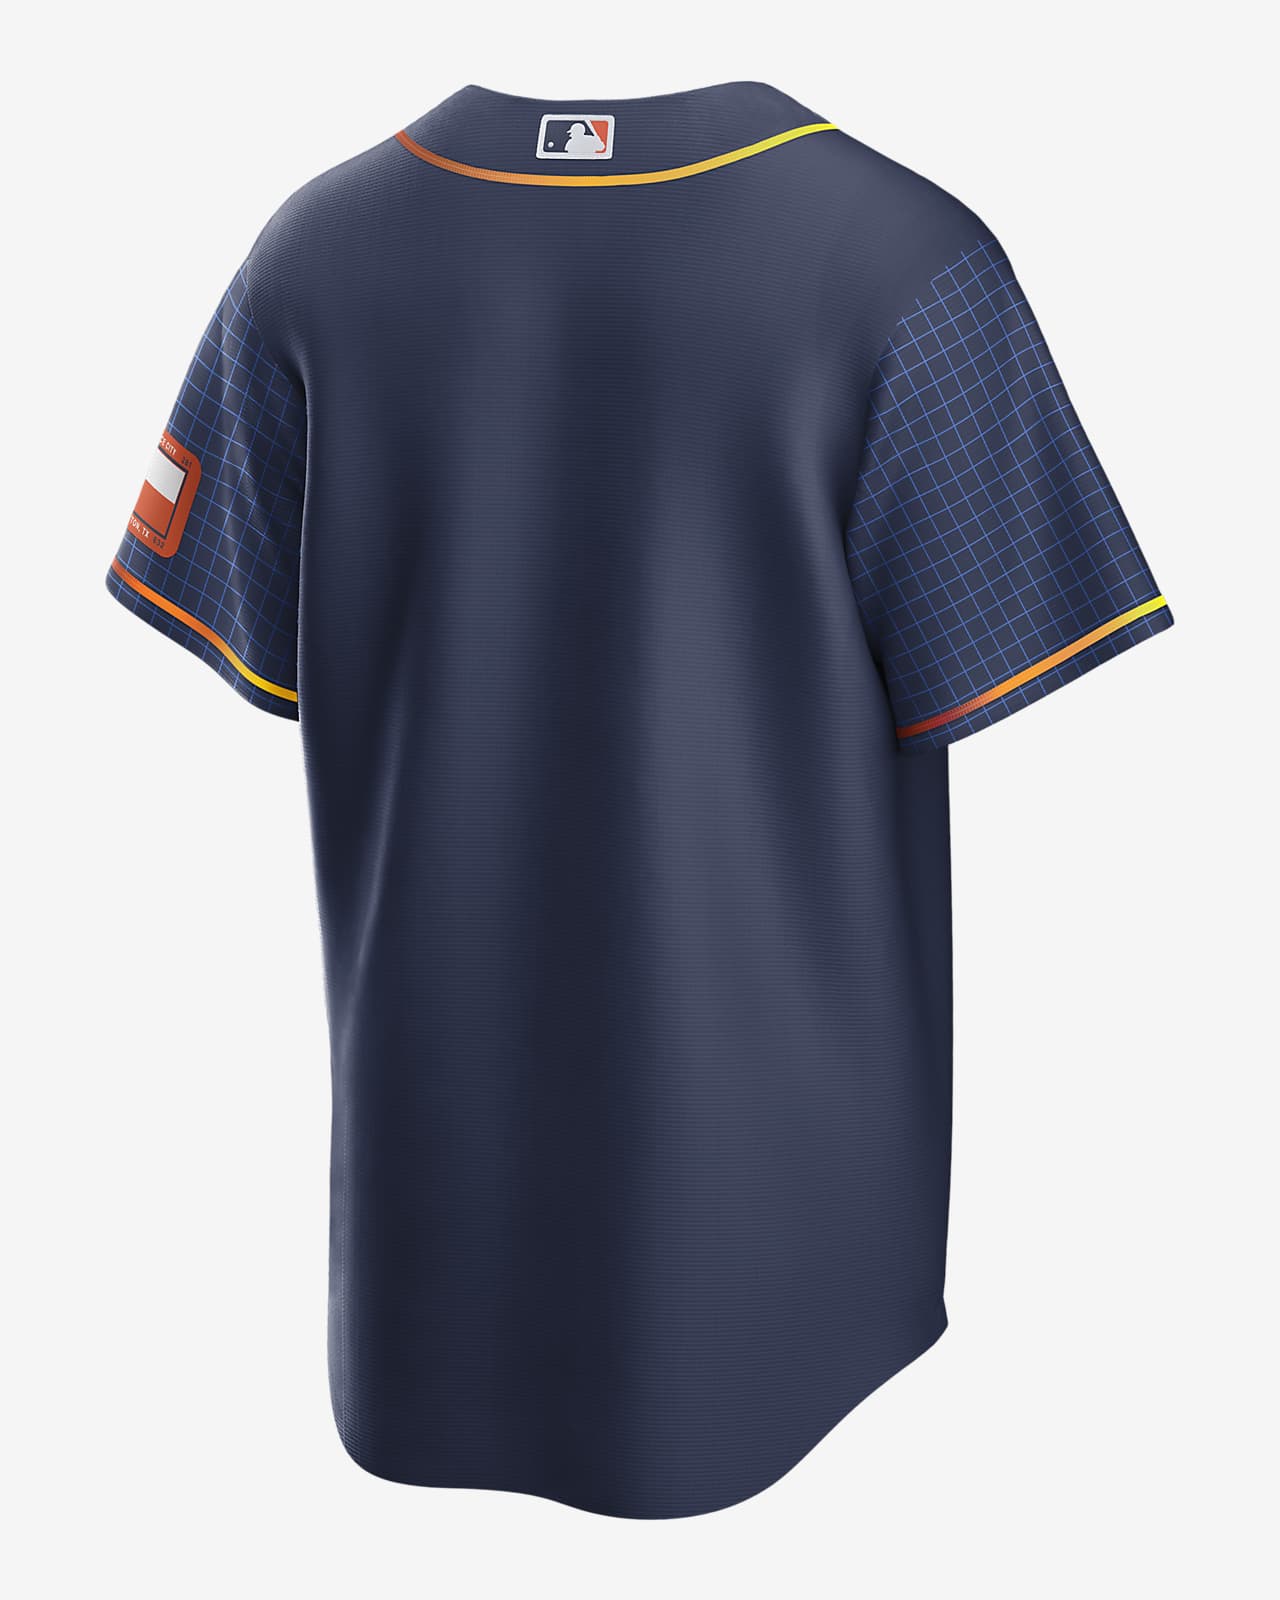 astros connect jersey